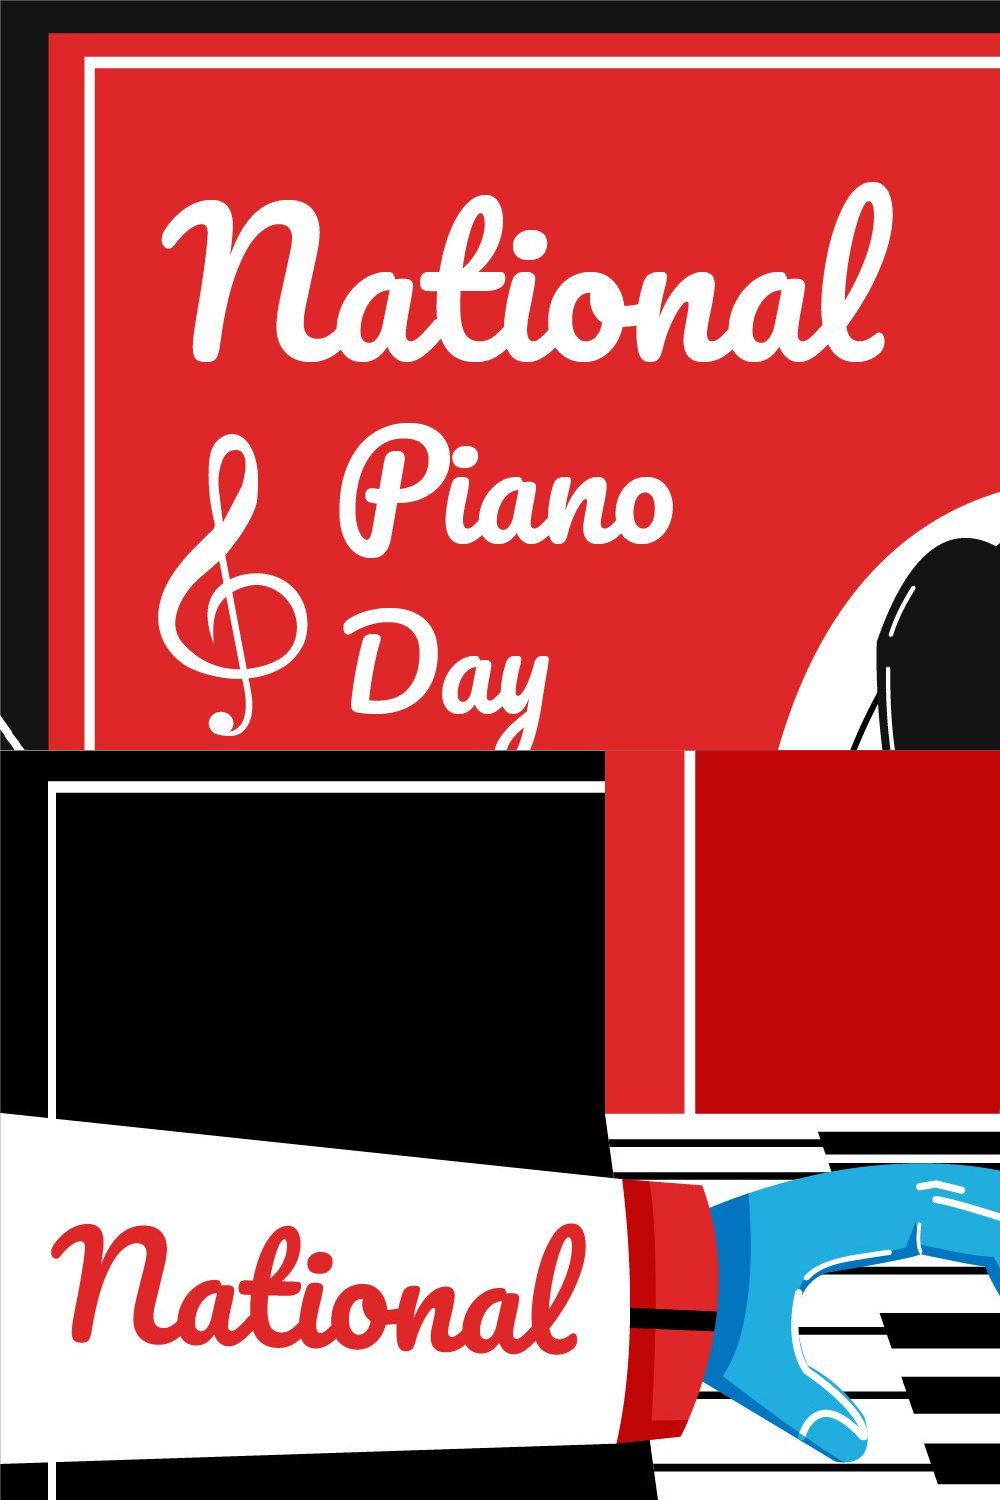 National Piano Day pinterest preview image.